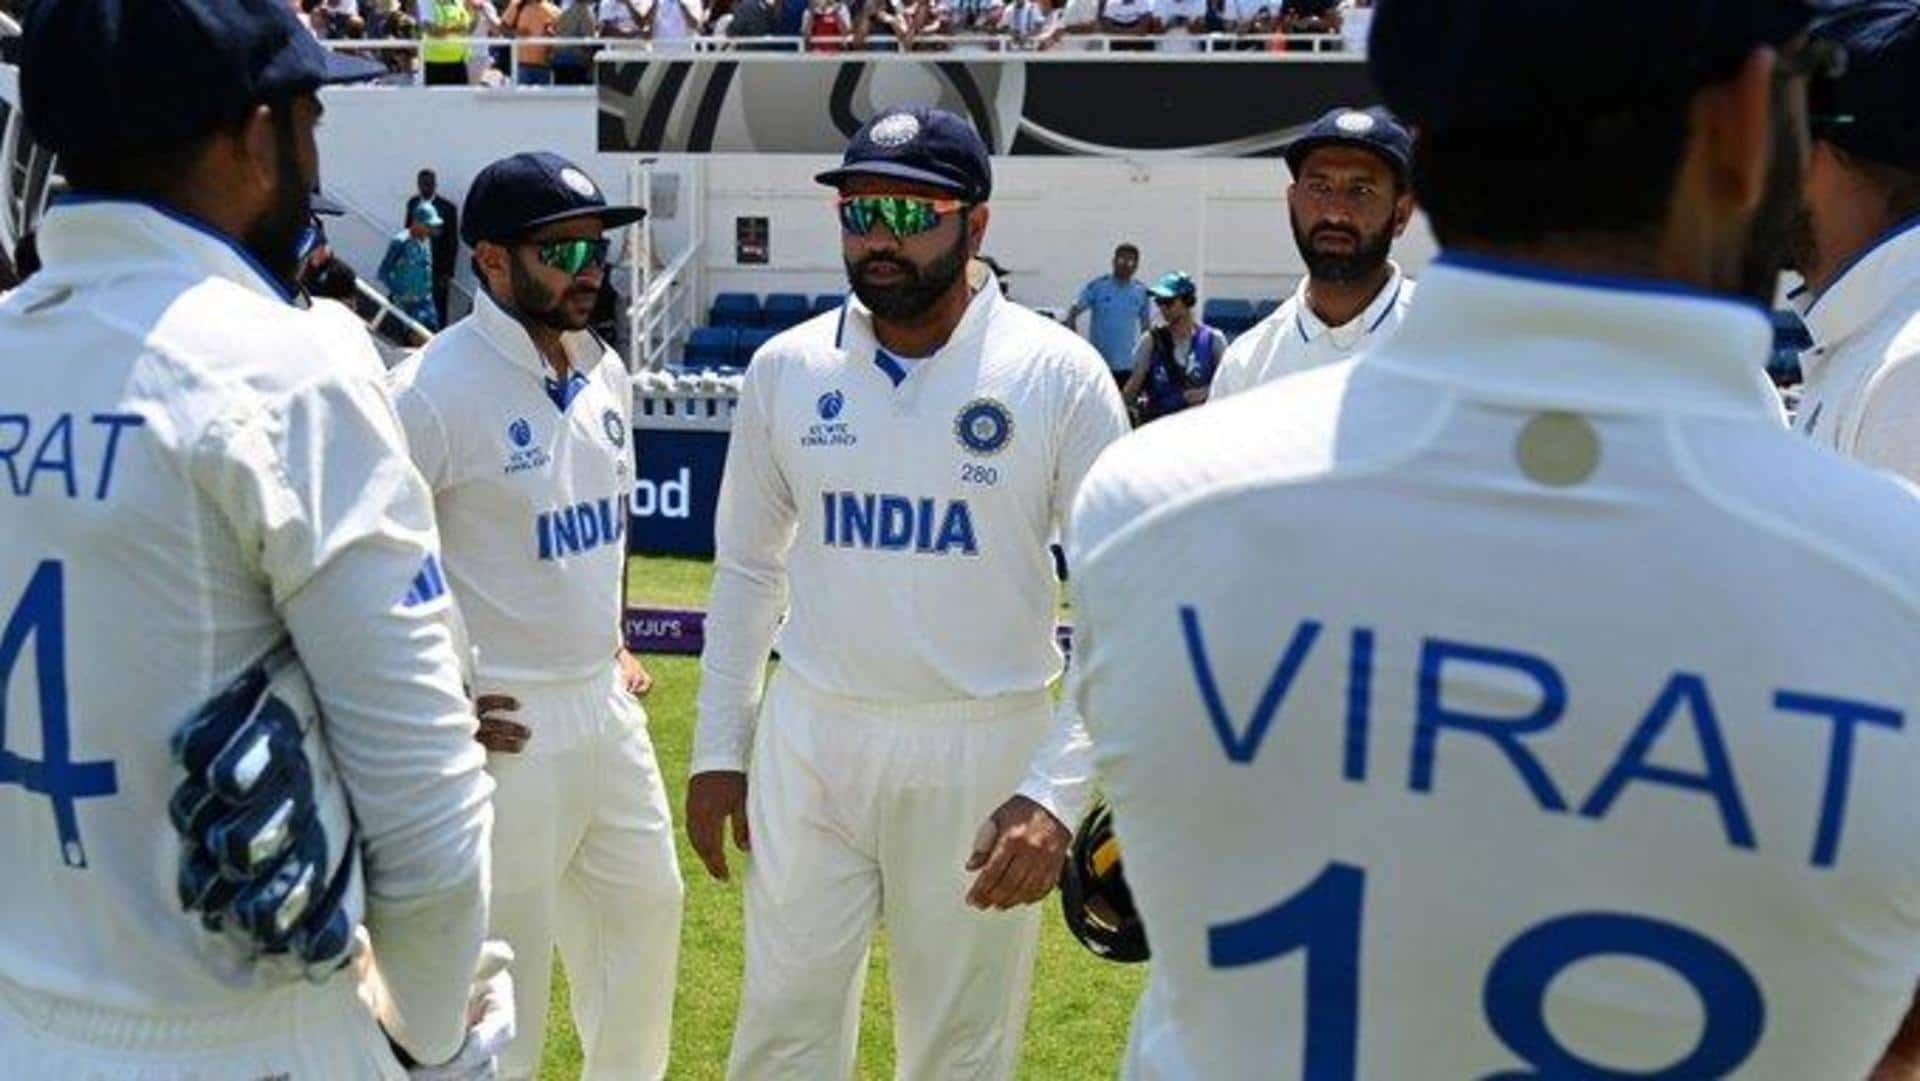 ICC World Test Championship 2021-23: Decoding India's campaign in numbers